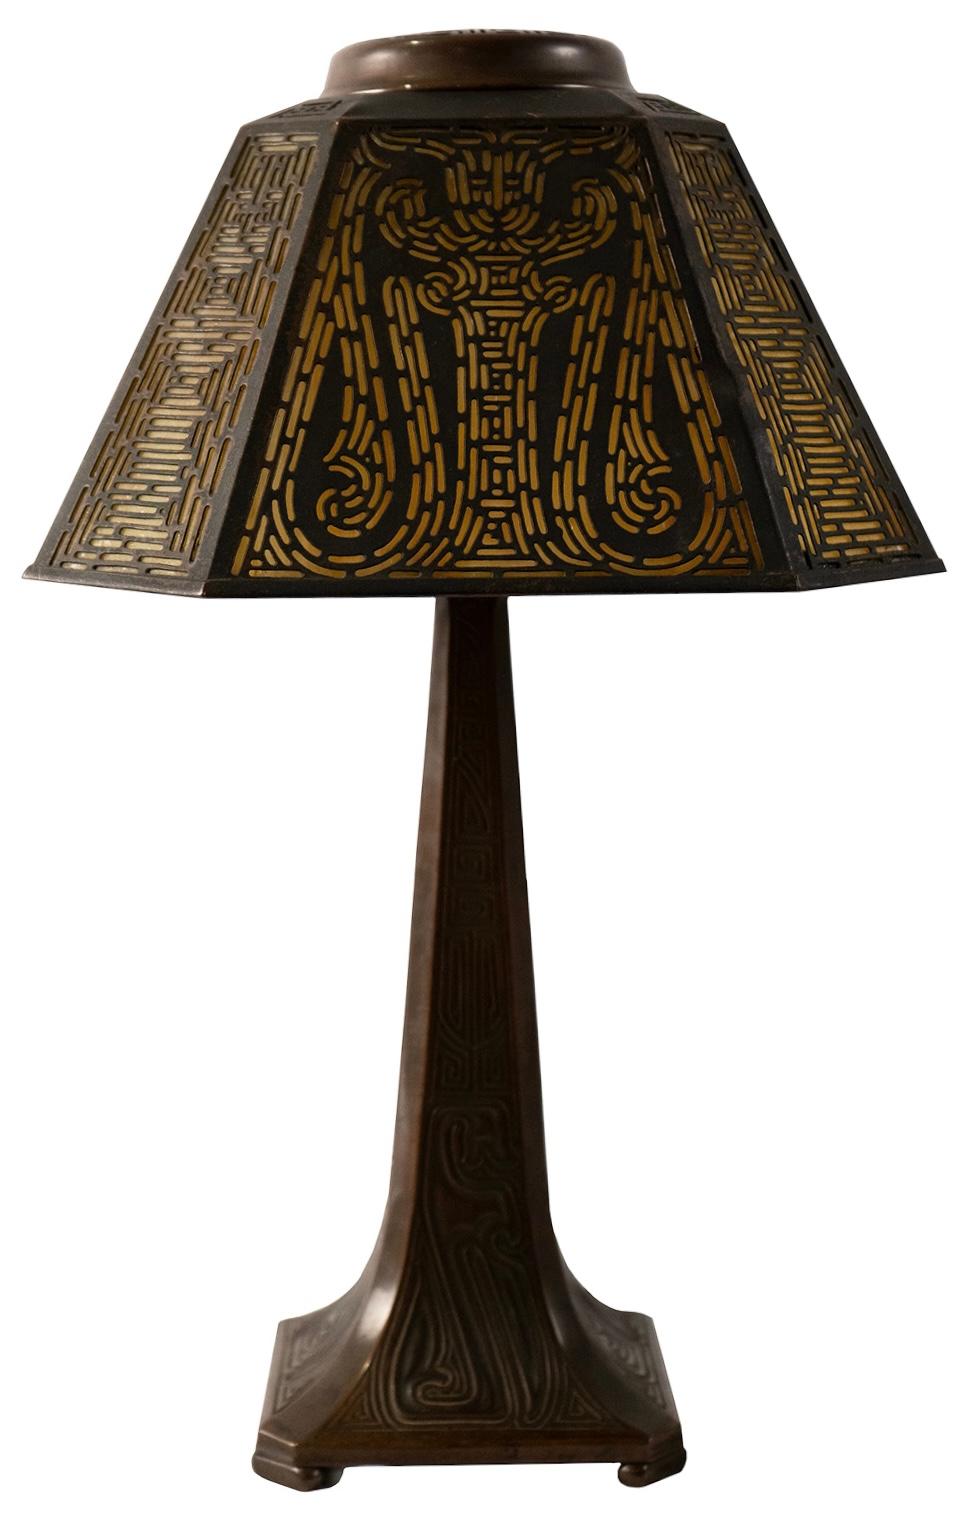 Early 20th century Tiffany Studios lamp. Made from slag glass and bronze.

Base stamped to bottom 'Tiffany Studios / New York / 535'

Shade dimensions: 5 1/2 x 10 in.

Height: 16 1/2 in.
 